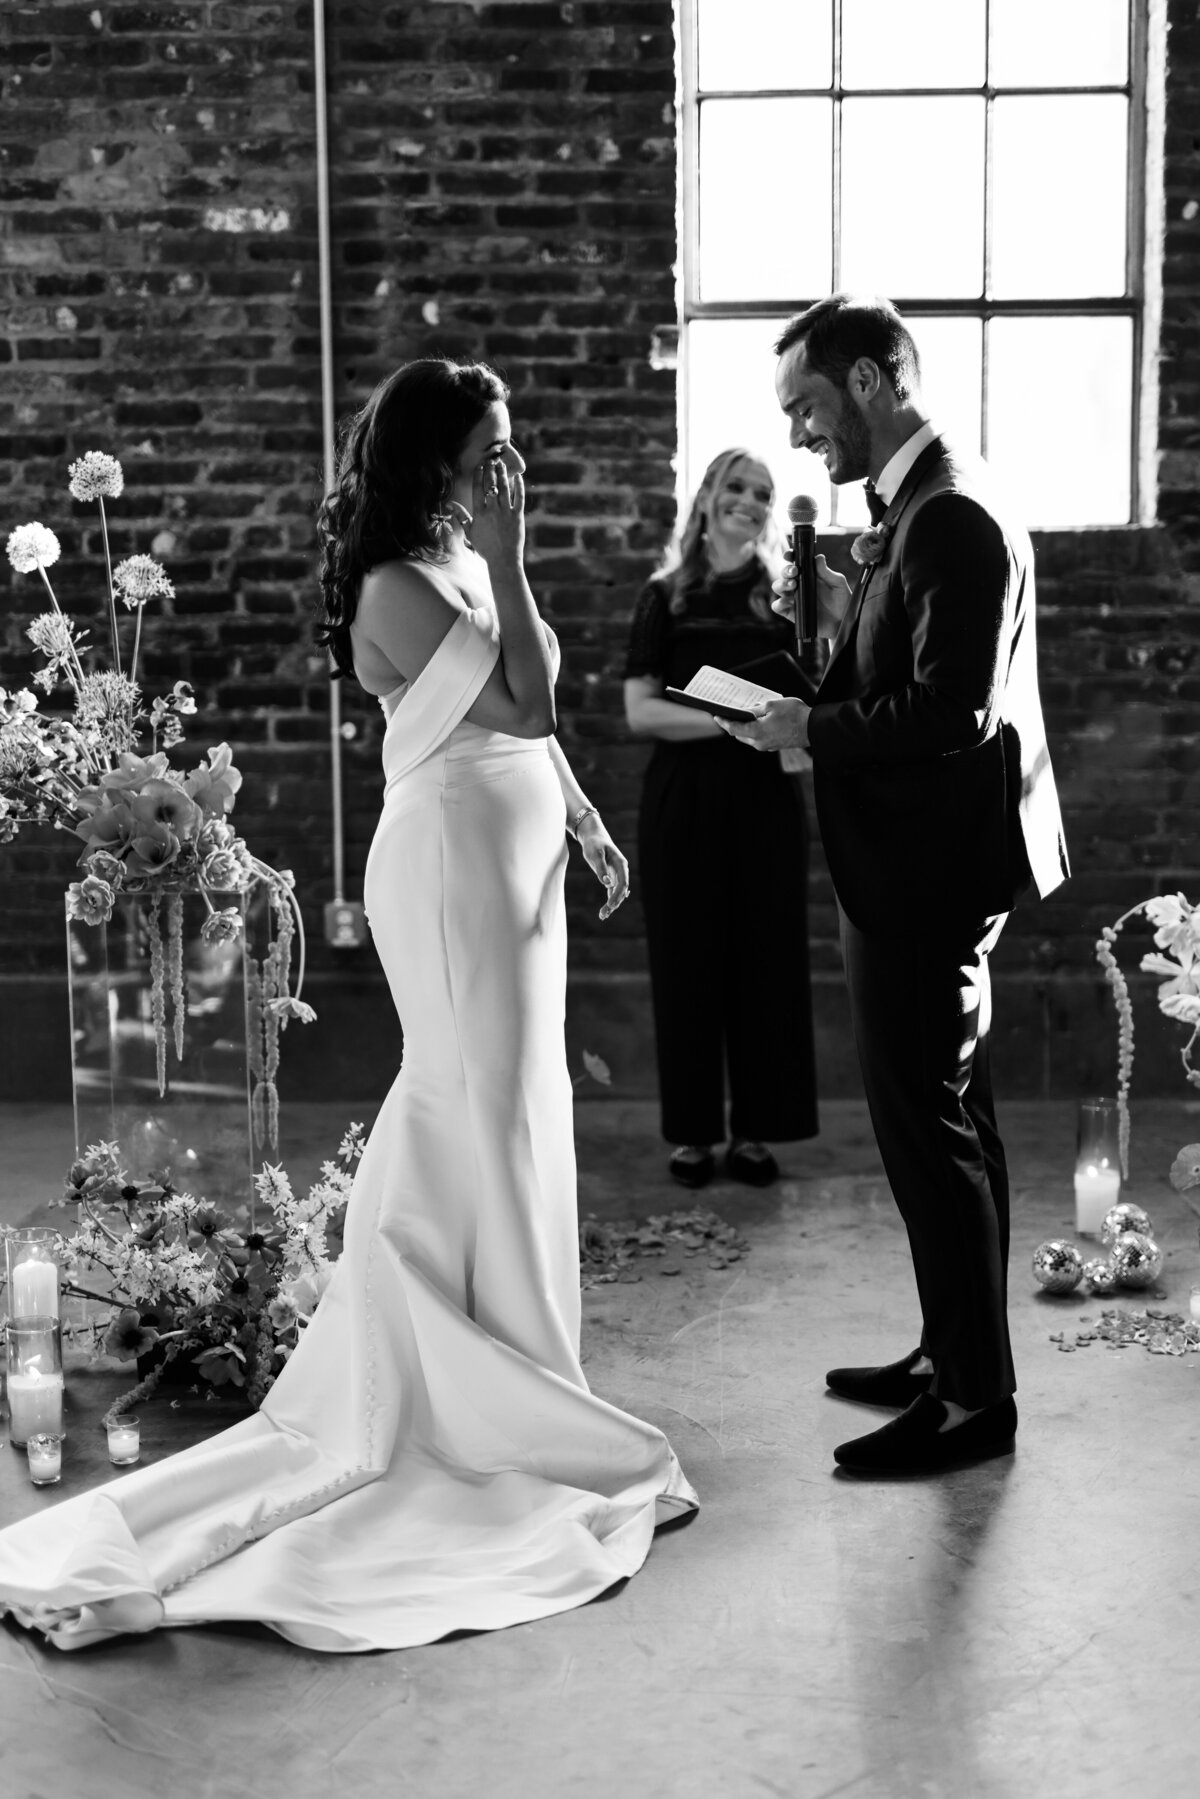 DC Wedding Photography at AutoShop in Union Market 37